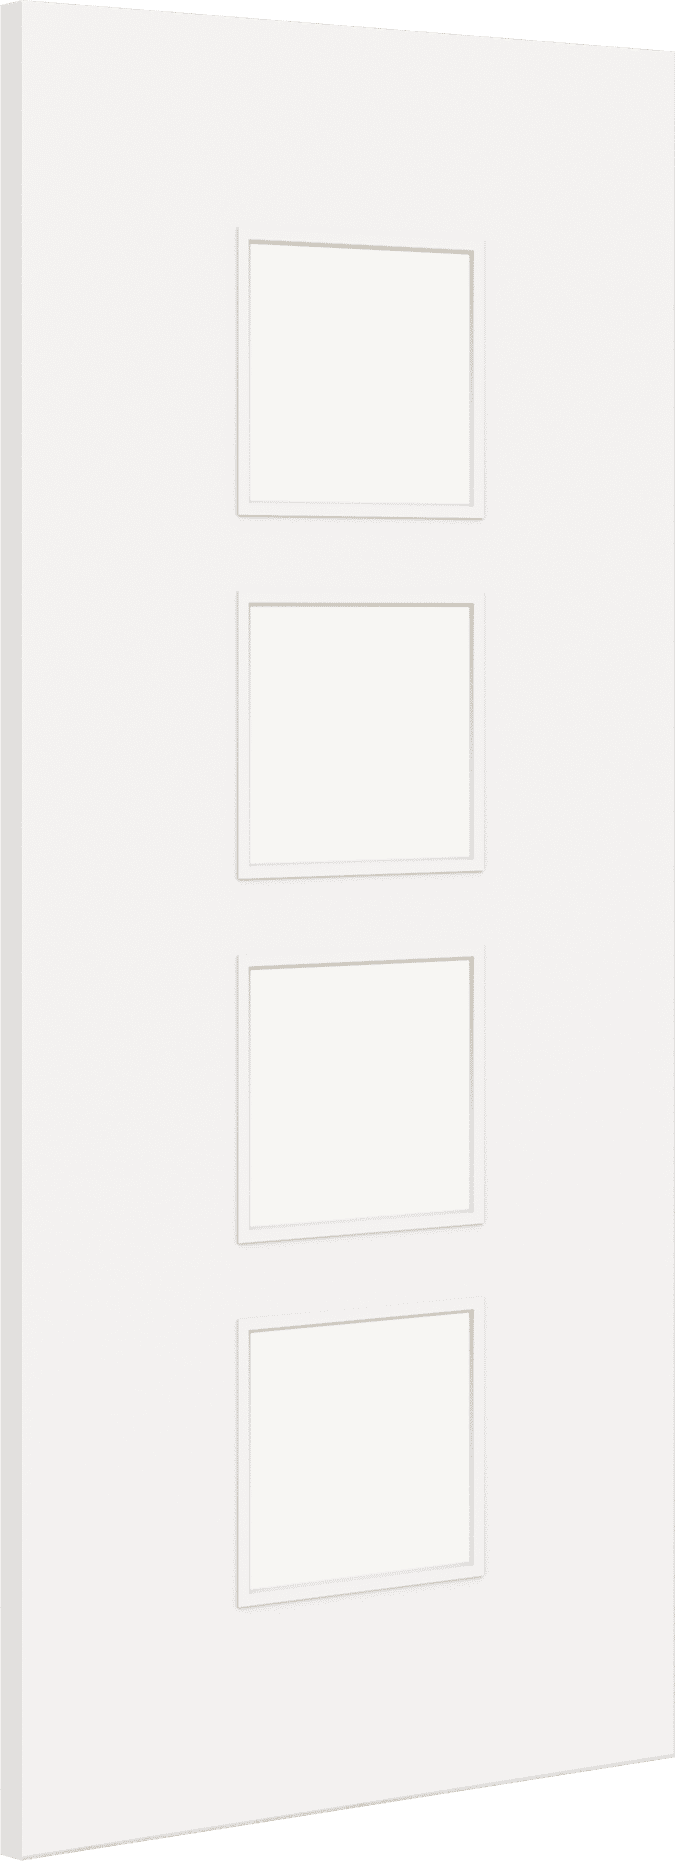 2040mm x 626mm x 44mm Architectural Paint Grade White 09 Clear Glazed Fire Door Blank